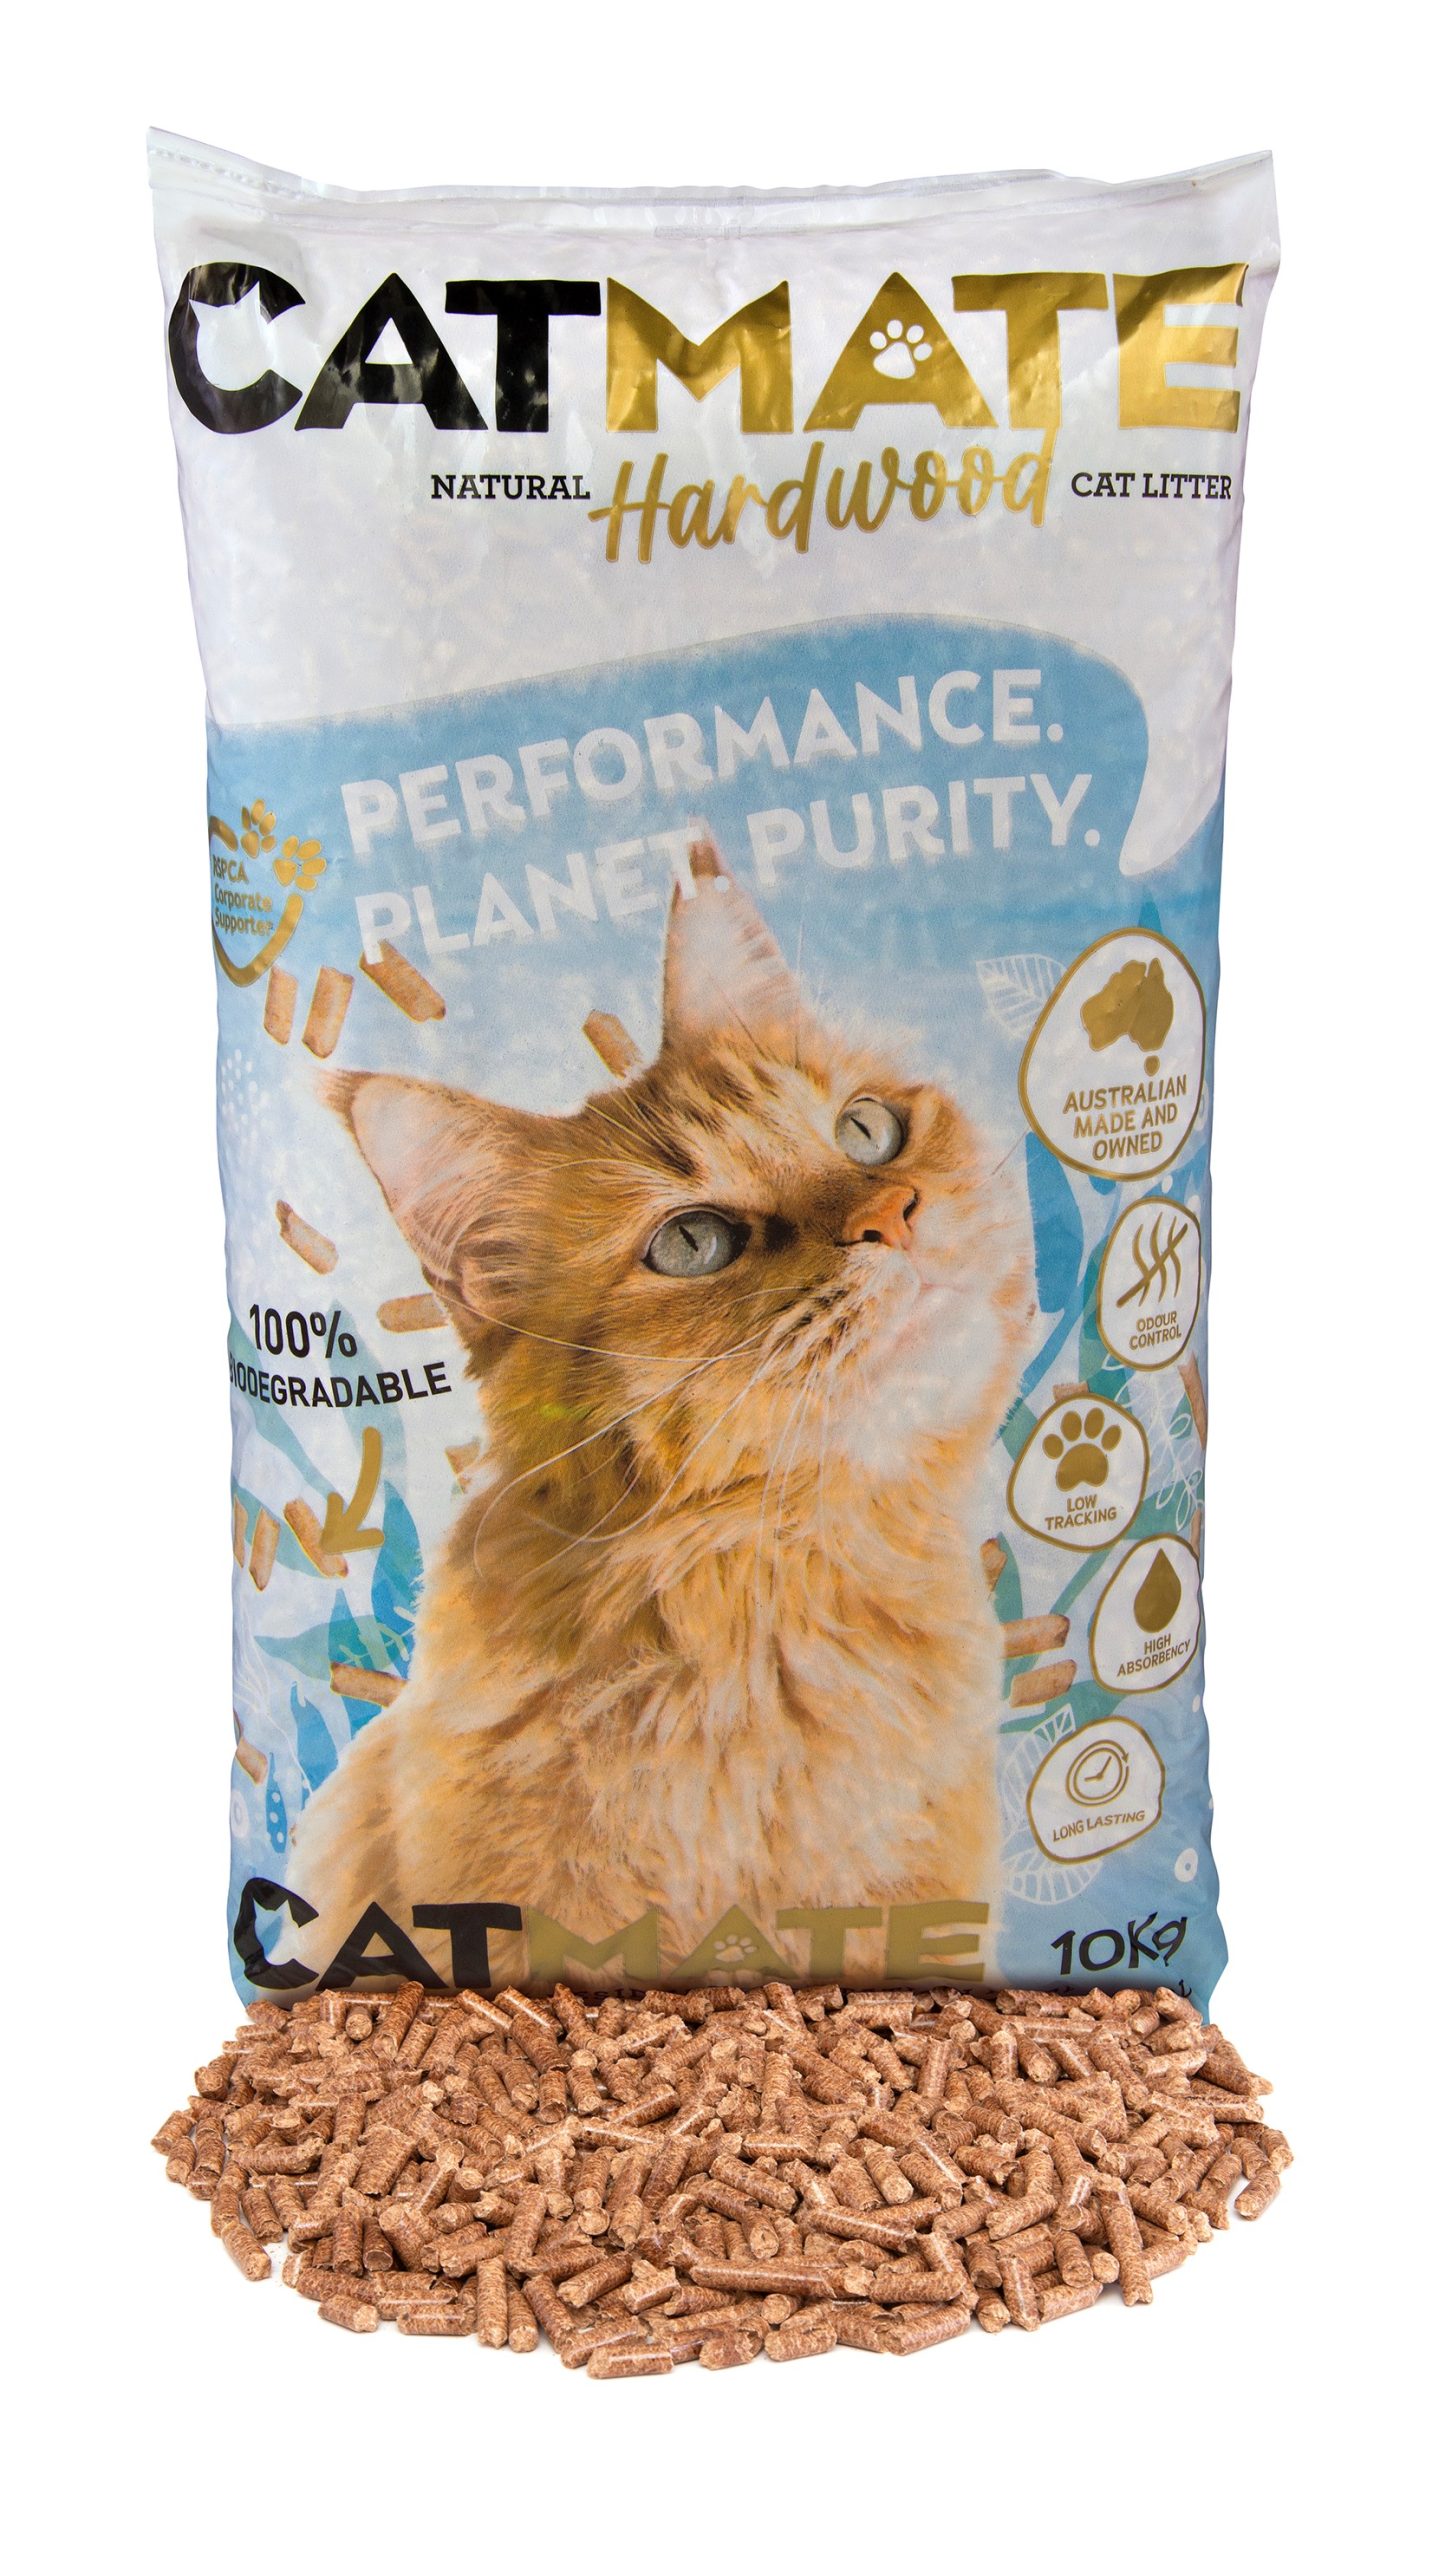 Catmate Hardwood Litter (available from retail stores only)